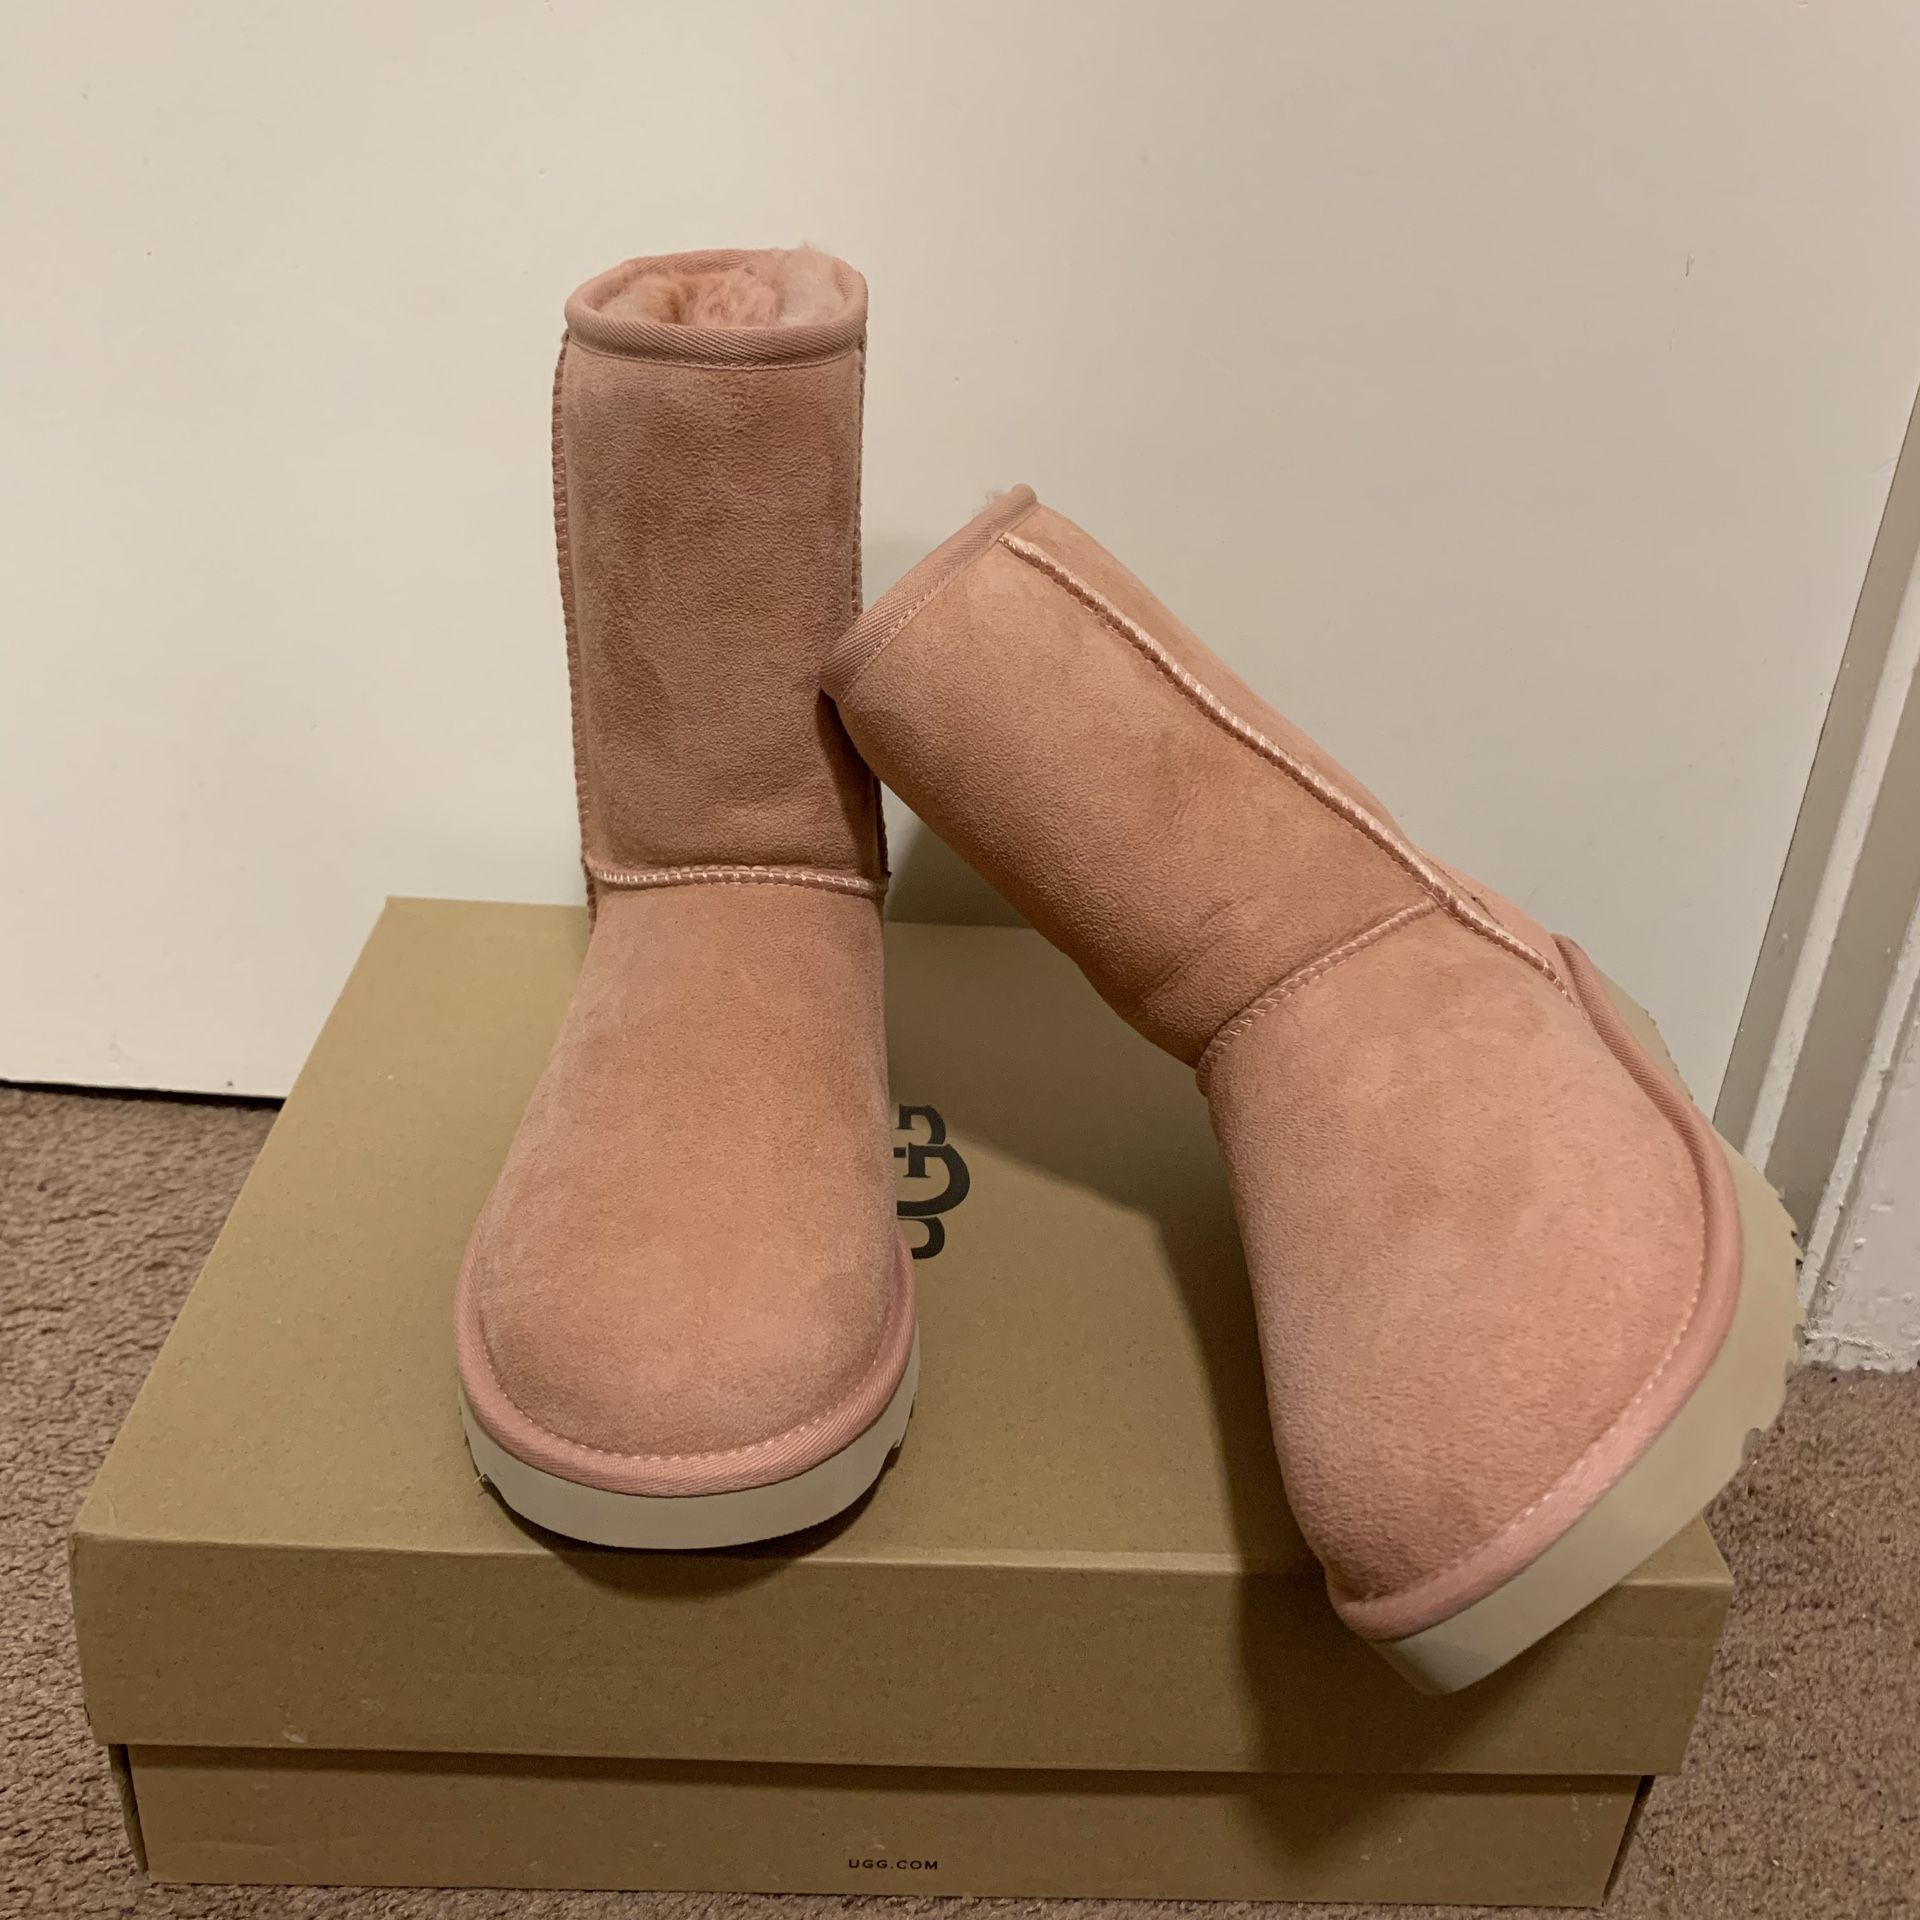 100% Authentic Brand New in Box UGG Classic Short Boots / Women size 6 and Women size 7 / Color: La Sunshine